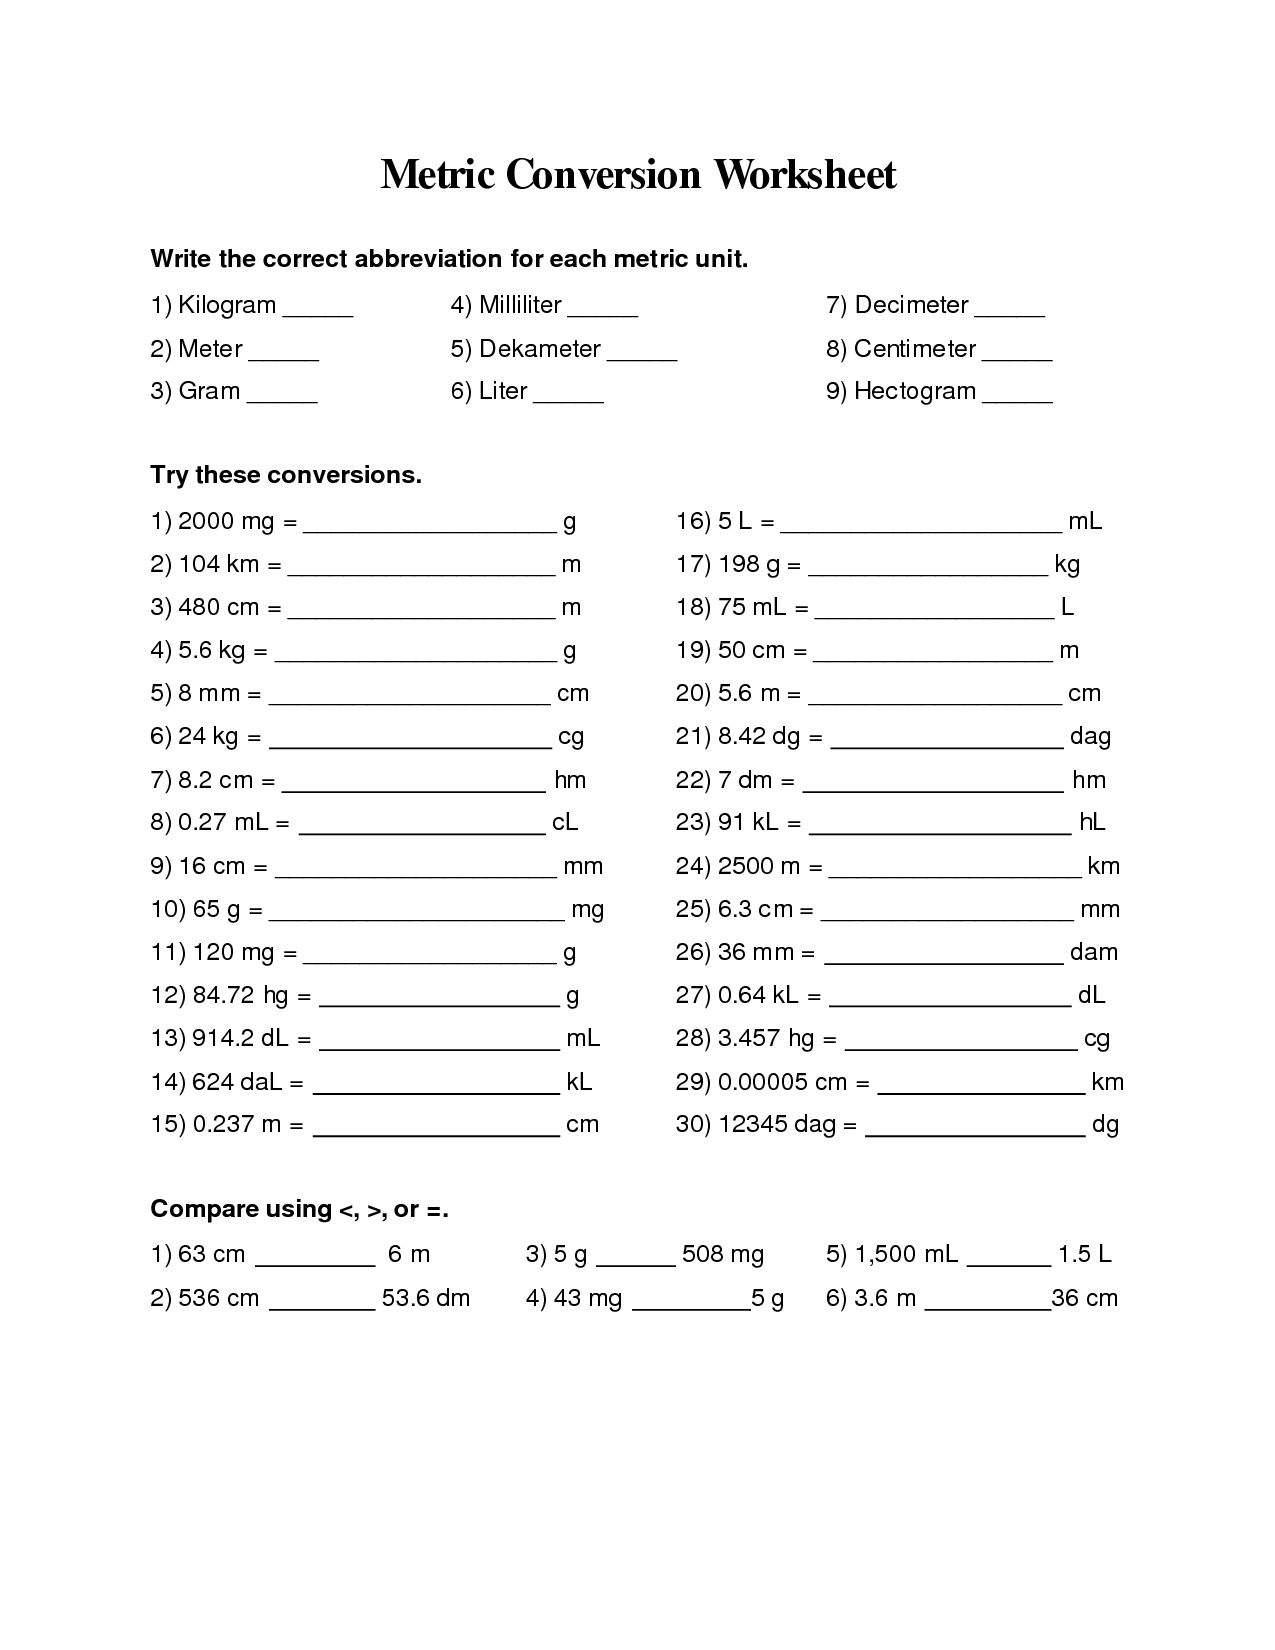 metric-conversion-worksheet-4-worksheets-for-home-learning